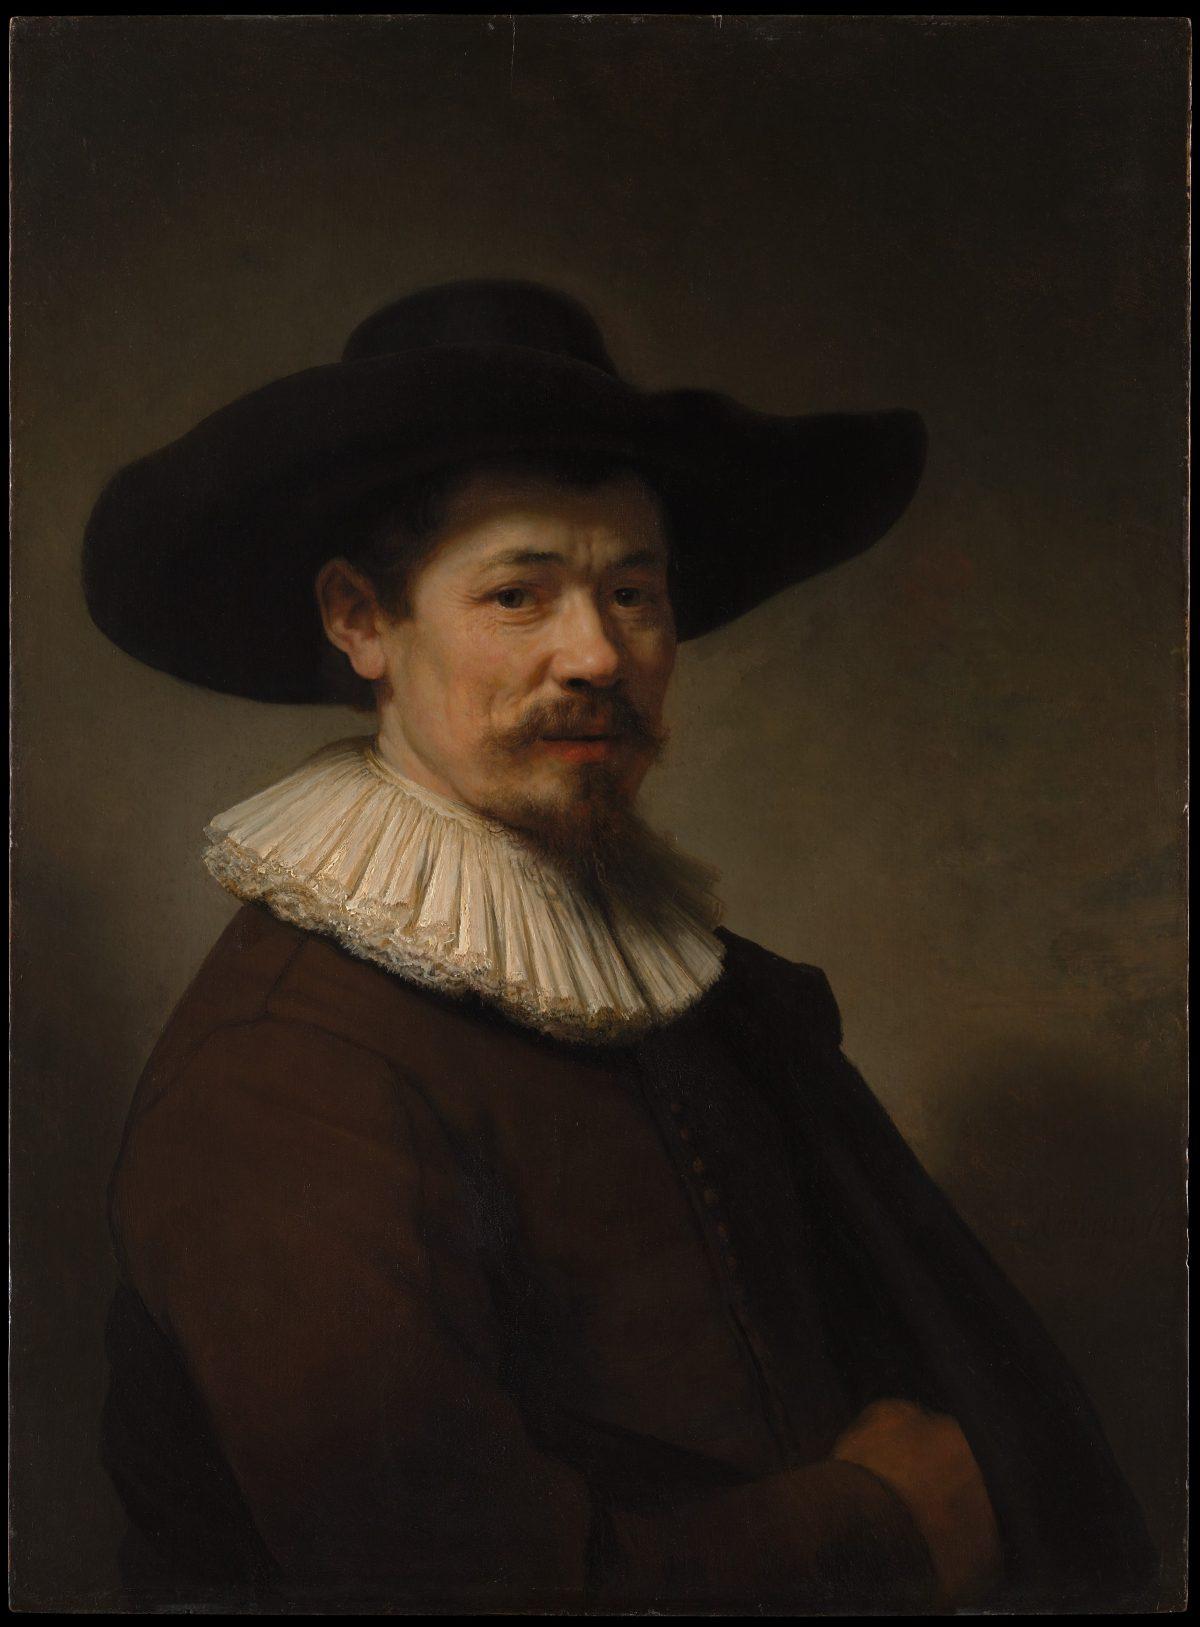 “Herman Doomer,” 1640, by Rembrandt van Rijn). Oil on wood, 29 5/8 inches by 21 3/4 inches. H. O. Havemeyer Collection, bequest of Mrs. H. O. Havemeyer, 1929. (The Metropolitan Museum of Art, New York)